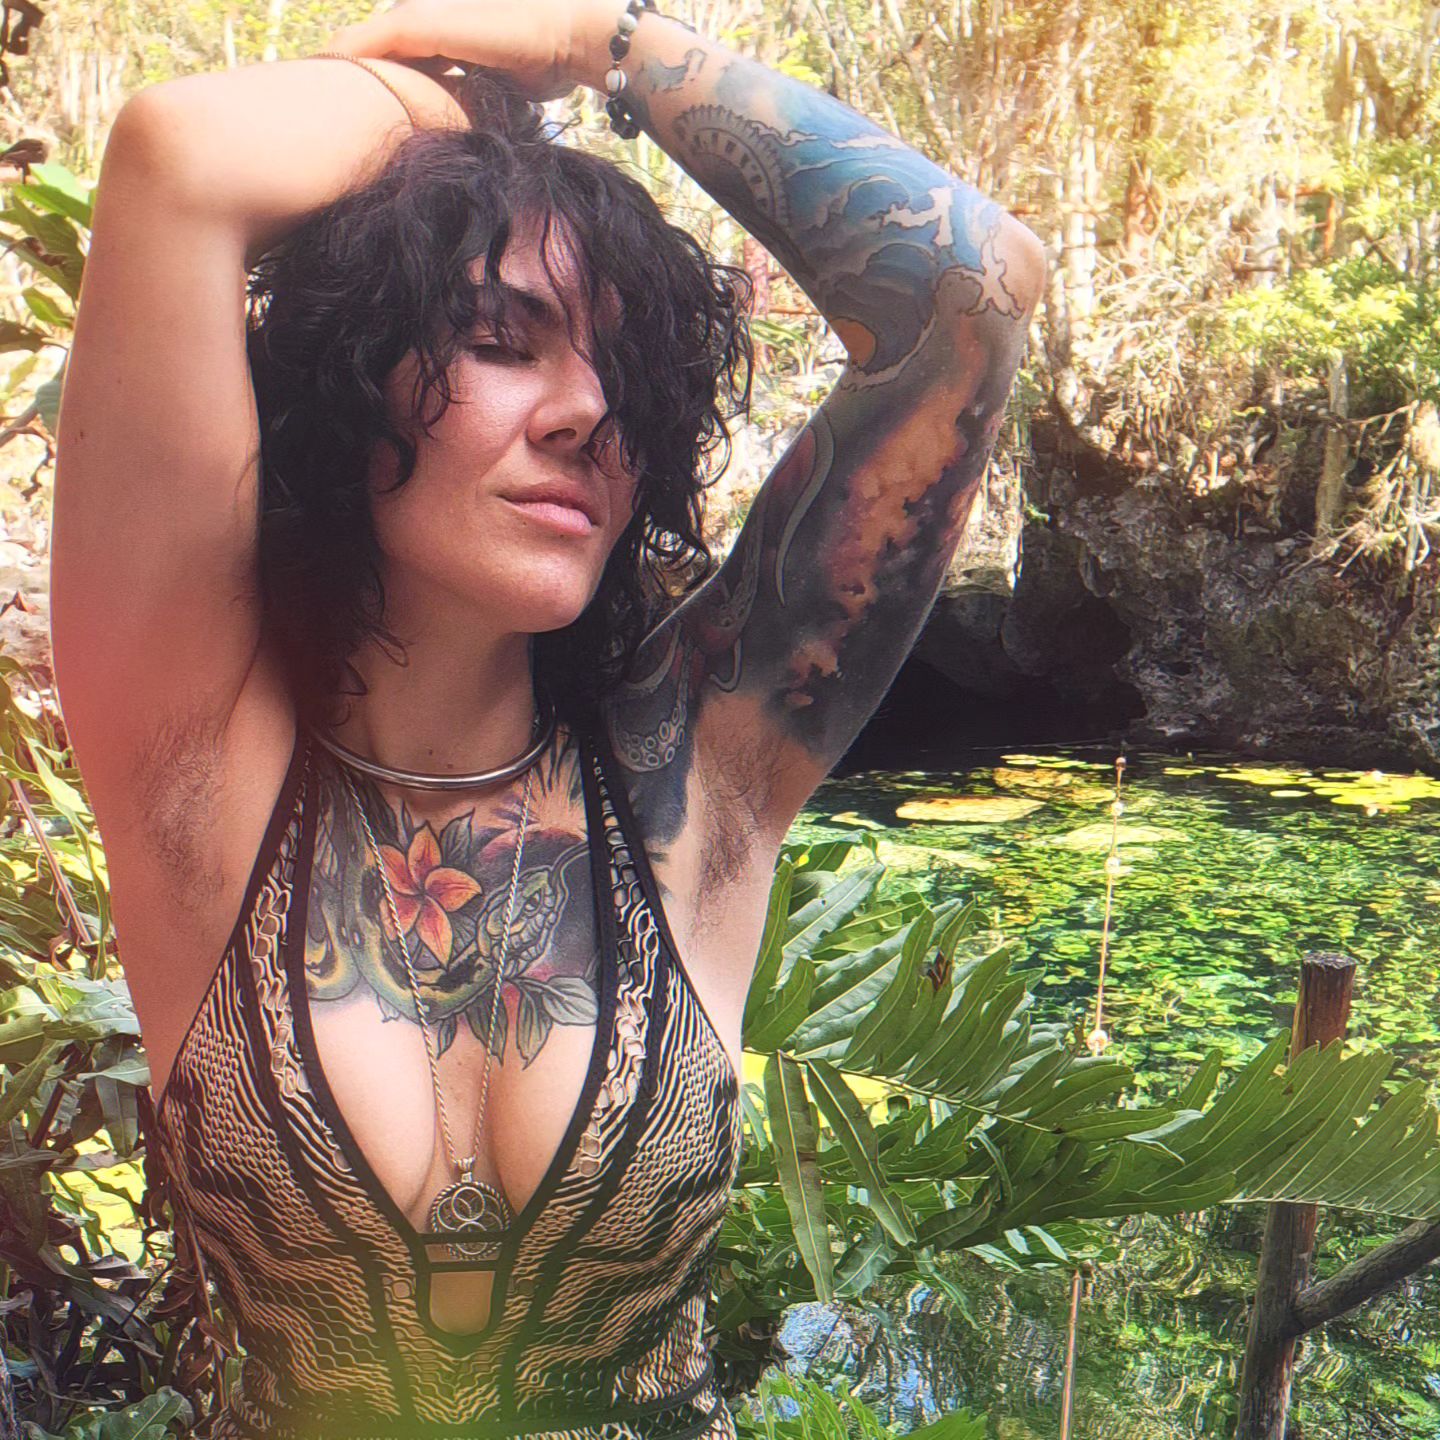 The theme this week is purification and alignment with my true north.

#digitalnomad #modelgirl #altgirl #optoutside #adventuregirl #travelporn #naturevibes #spirituality #manifestyourdreams #cenote #swimsuit #junglevibes